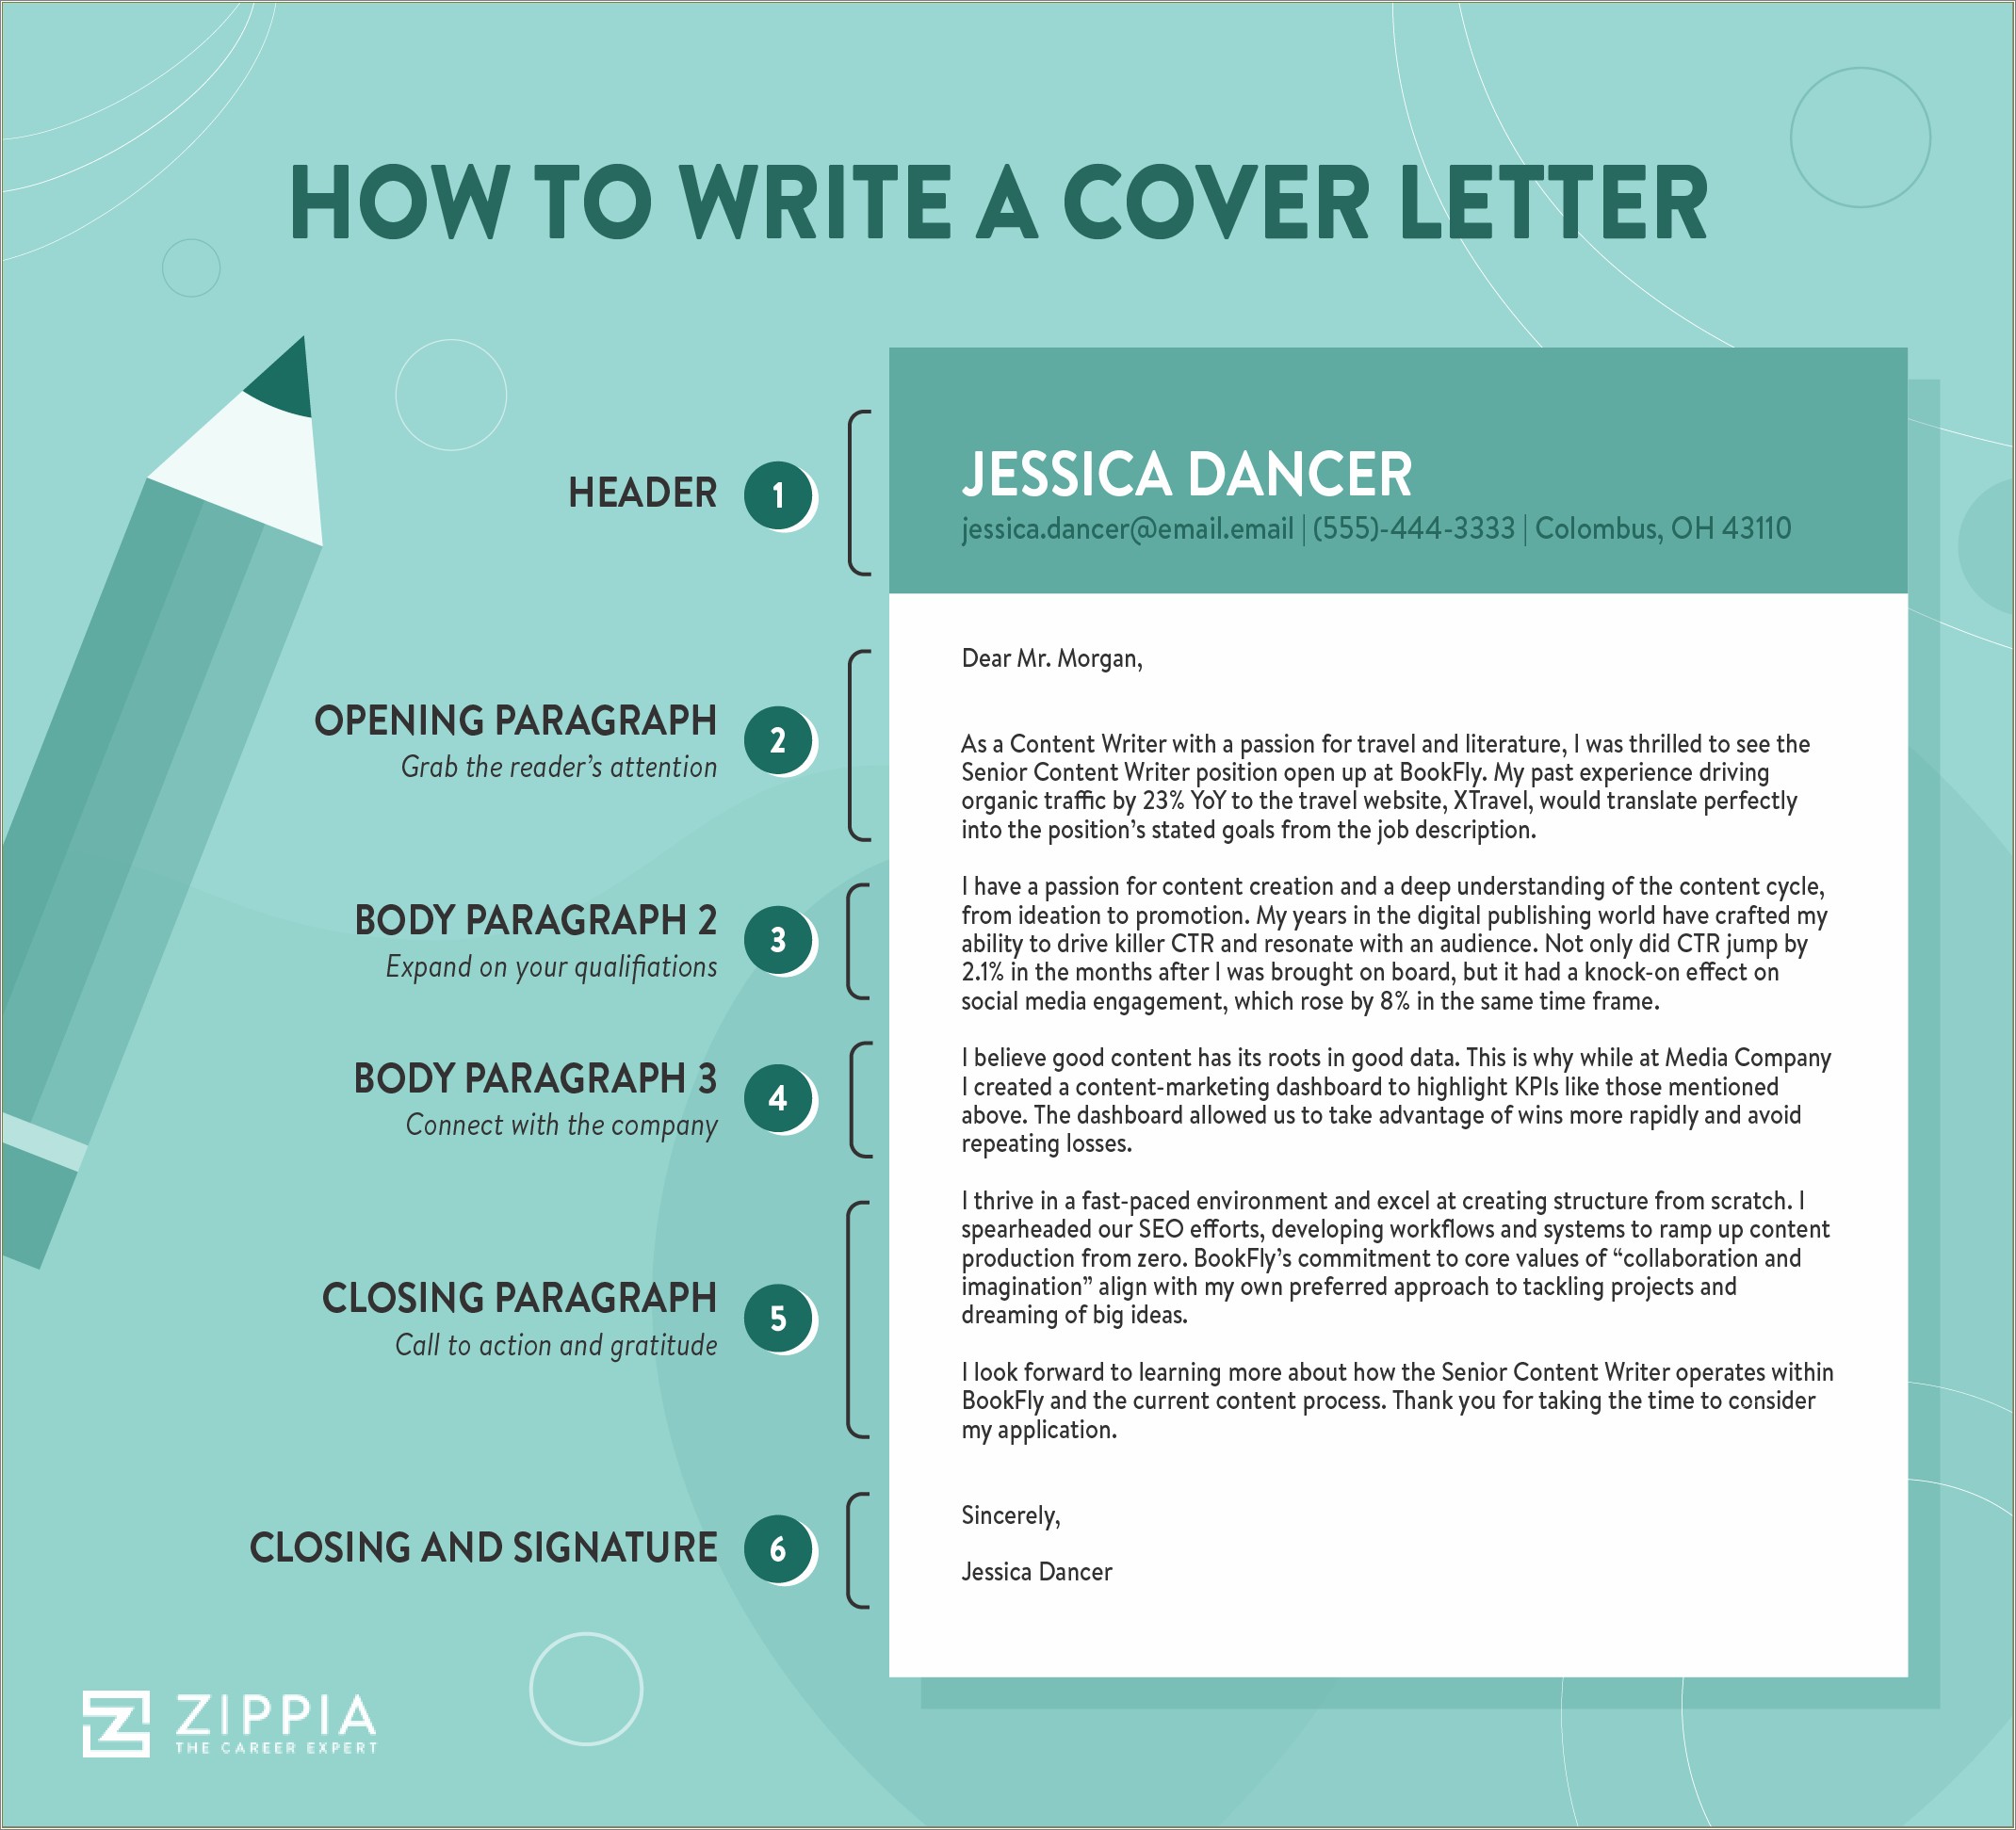 Relationship Between Cover Letter And Resume